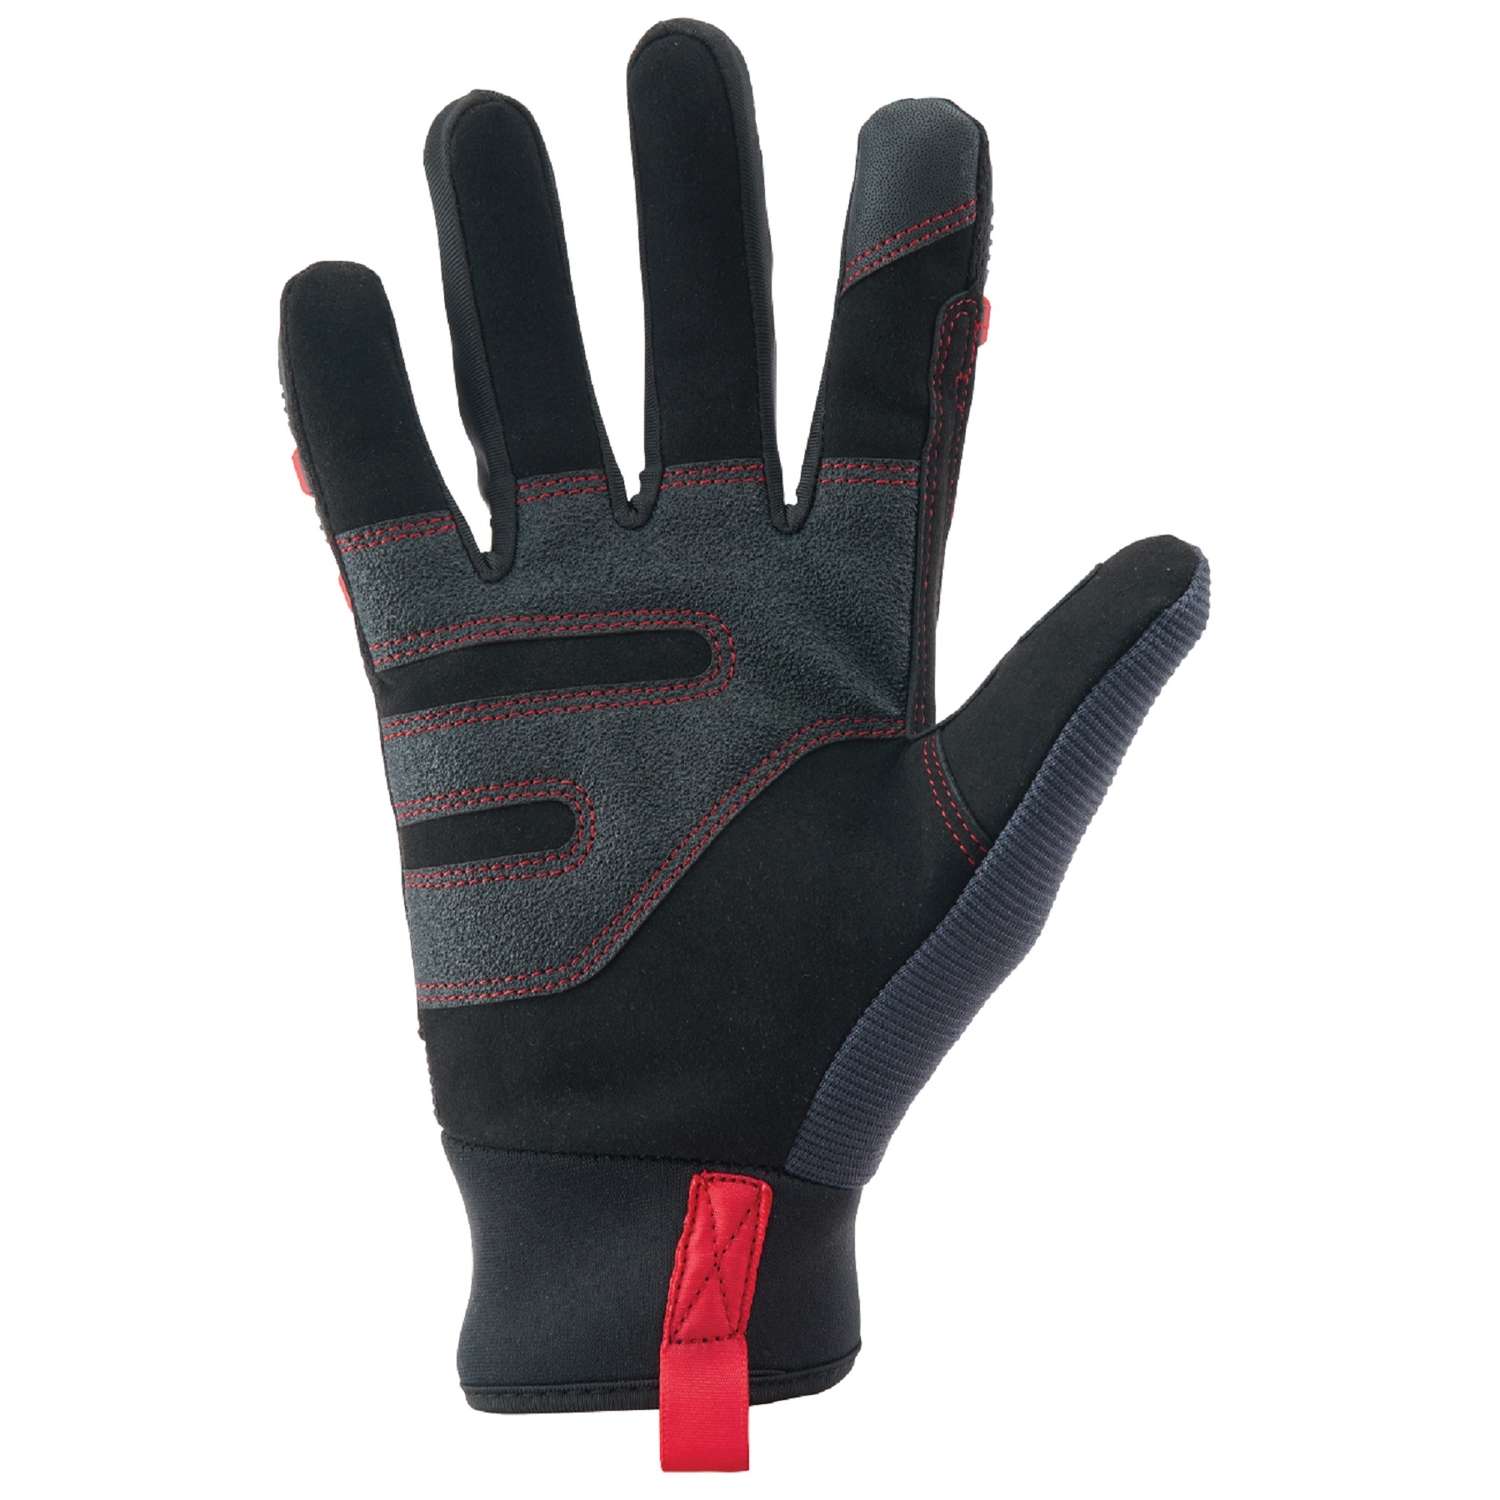 1Pair Red Working Glove For Women And Men Slip-proof Oil-resistant  Protective Gloves For Fishing, Gloves Restoration Work